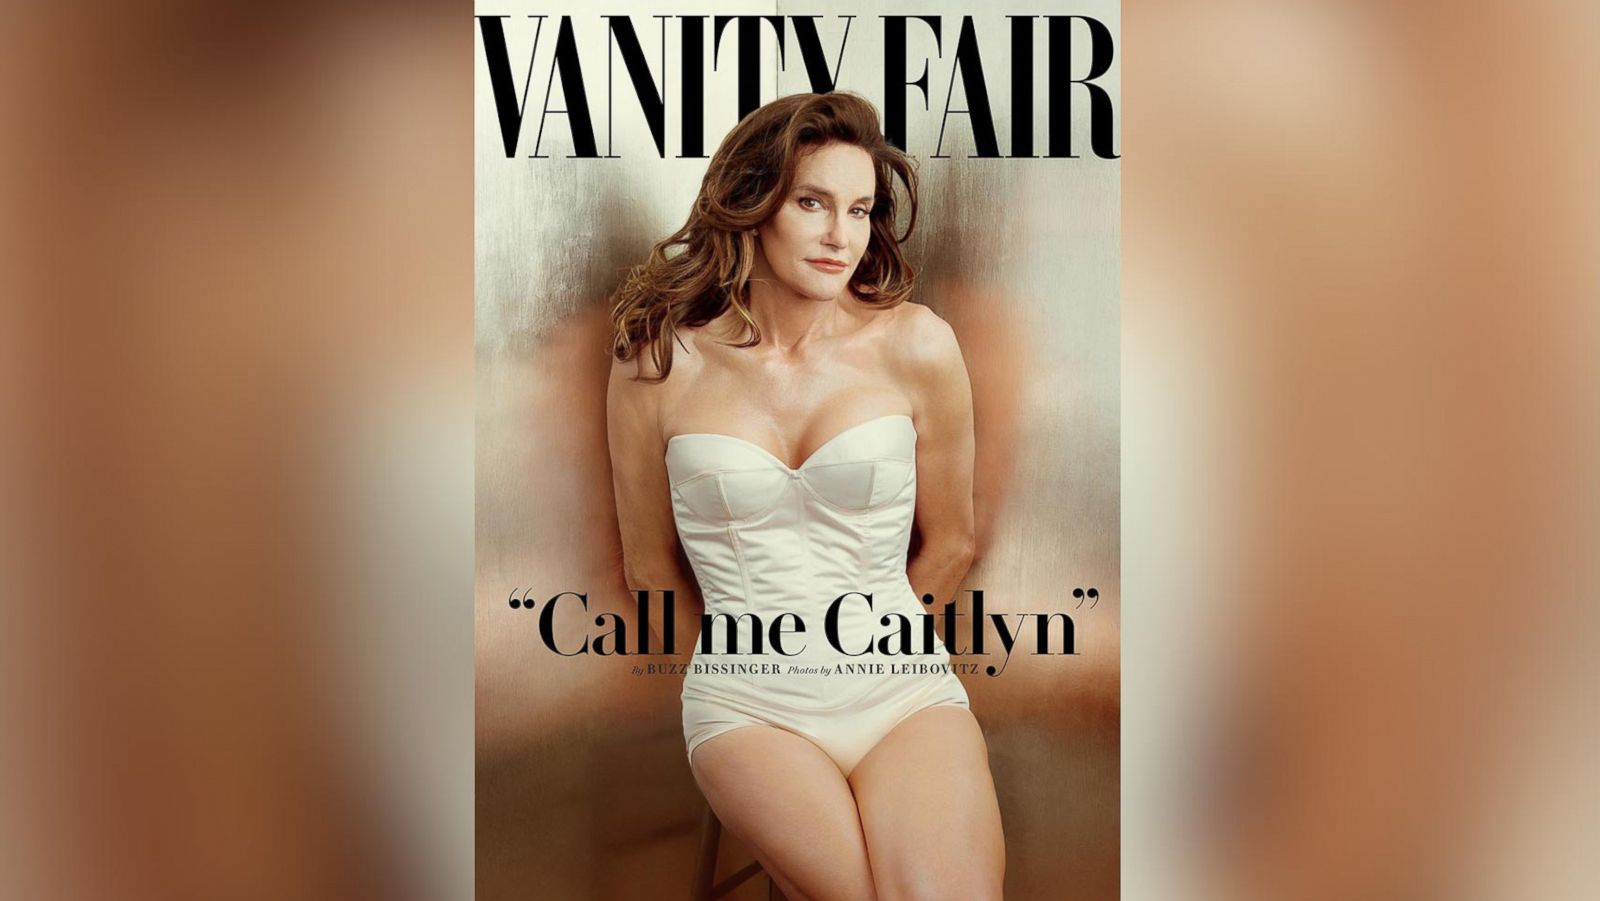 Caitlyn Jenner on Vanity Fair Cover, Shares Details of Her Life